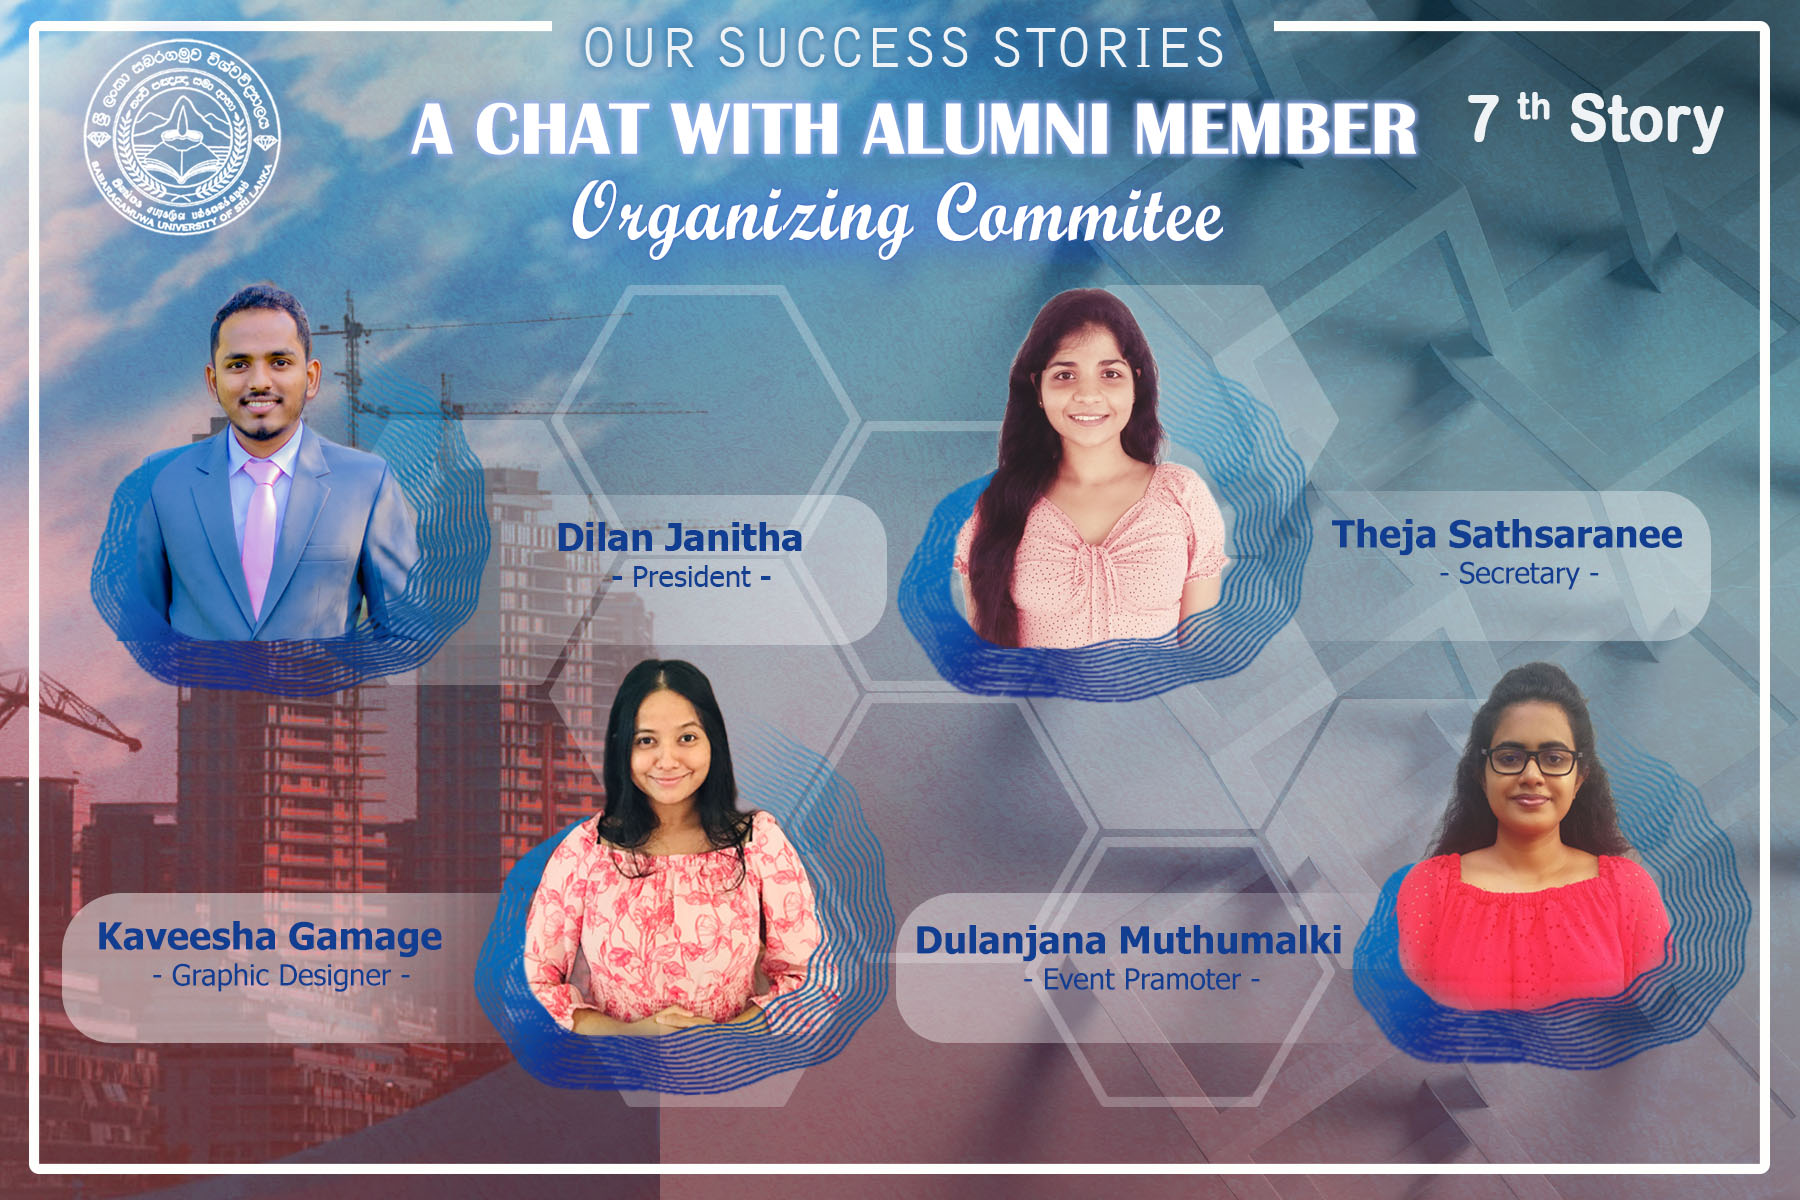 A chat with alumni member - 7th Story Udara De Zoysa (2004/2005 Batch)